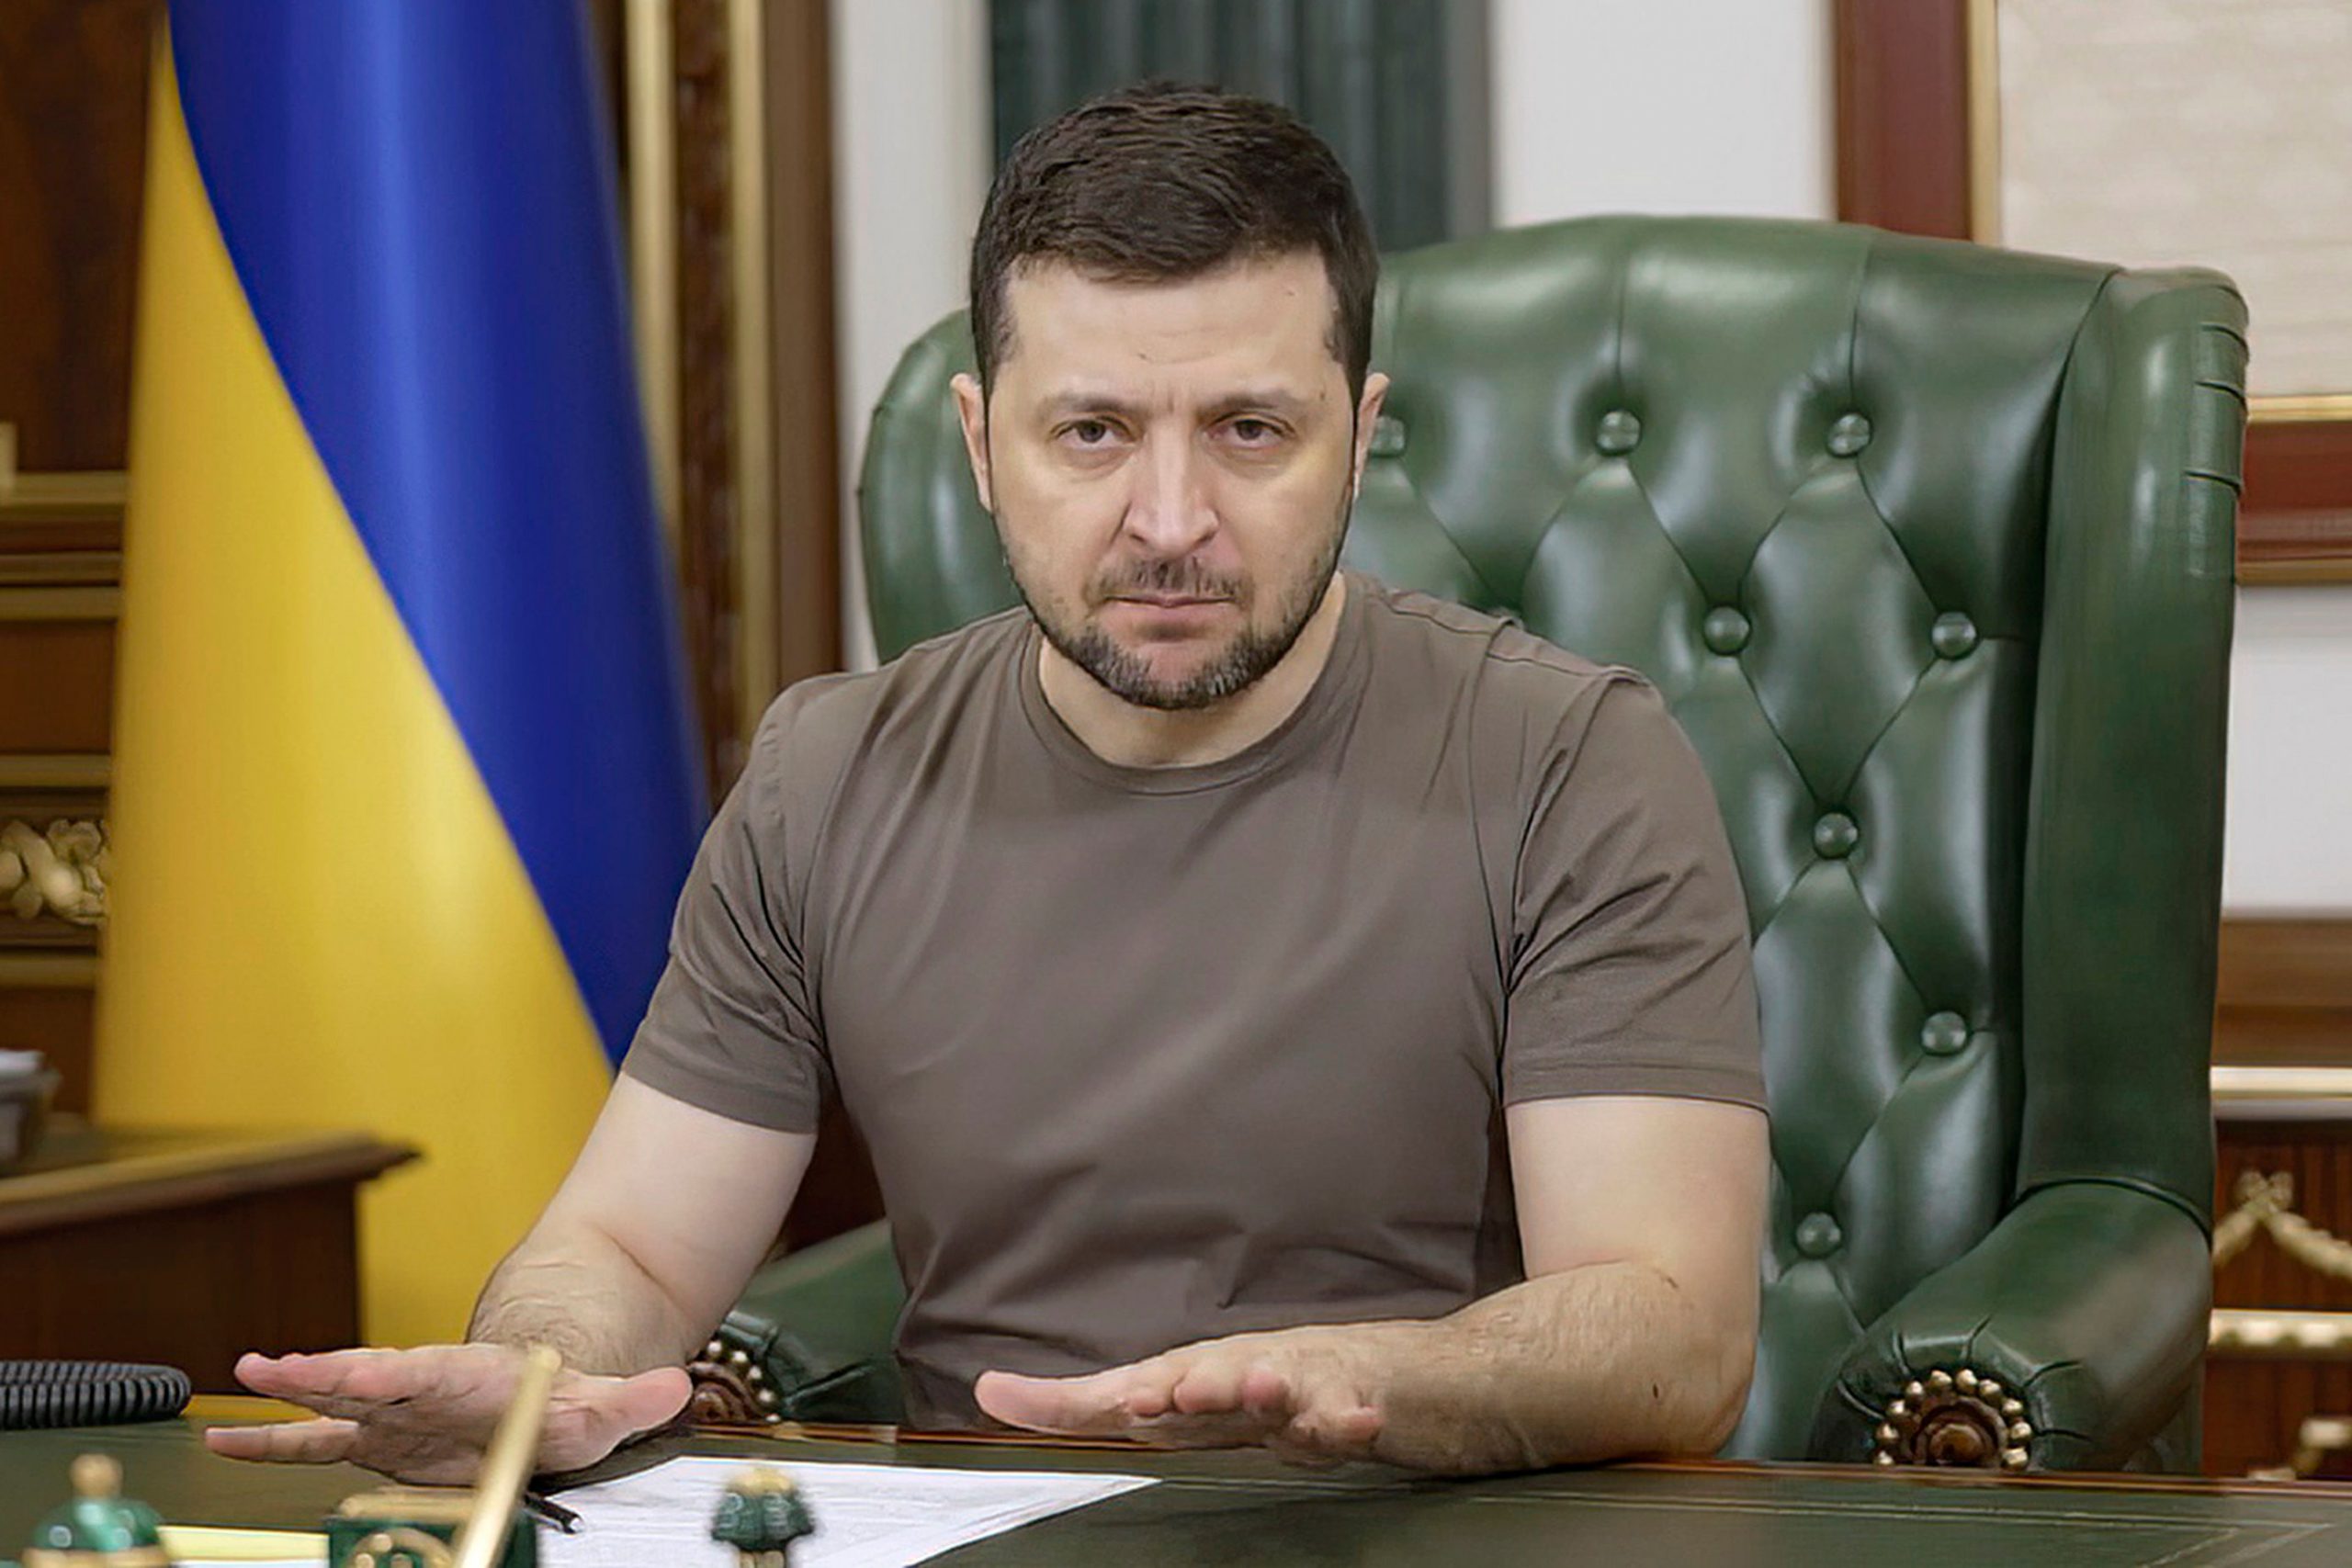 With Russia on the backfoot, Zelensky calls for economic revival in Ukraine